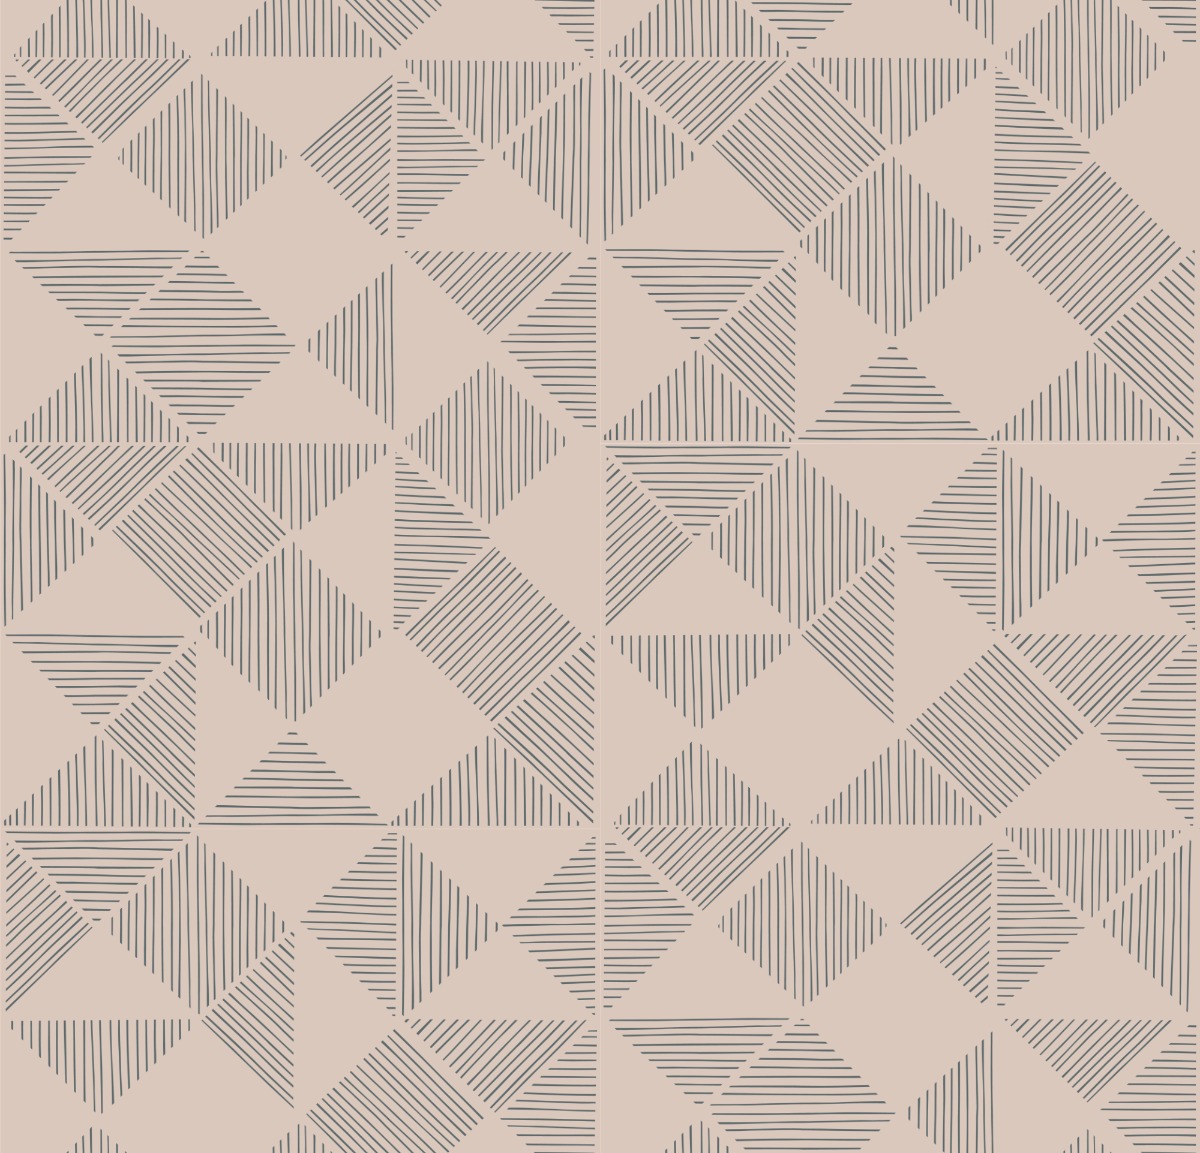 A seamless wallpaper texture with hoose wallpaper in pink cove units arranged in a  pattern